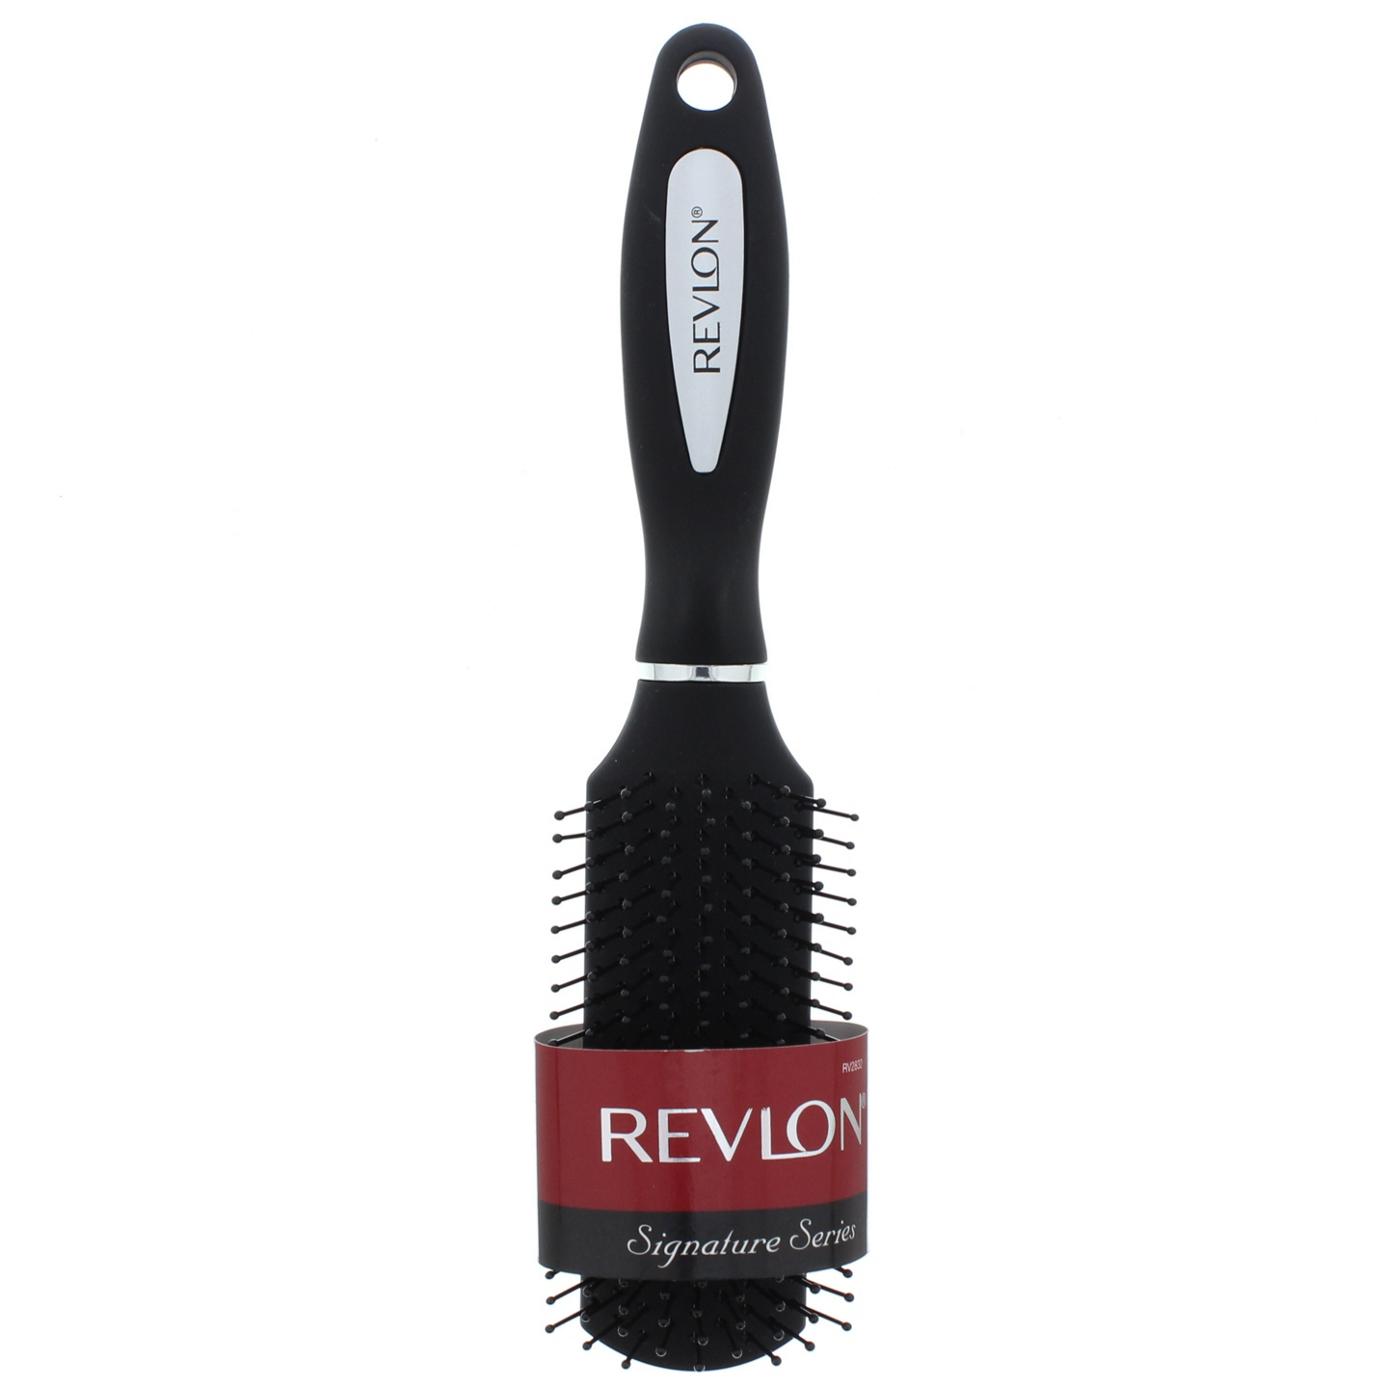 Revlon Hairbrush, Assorted Colors; image 2 of 2